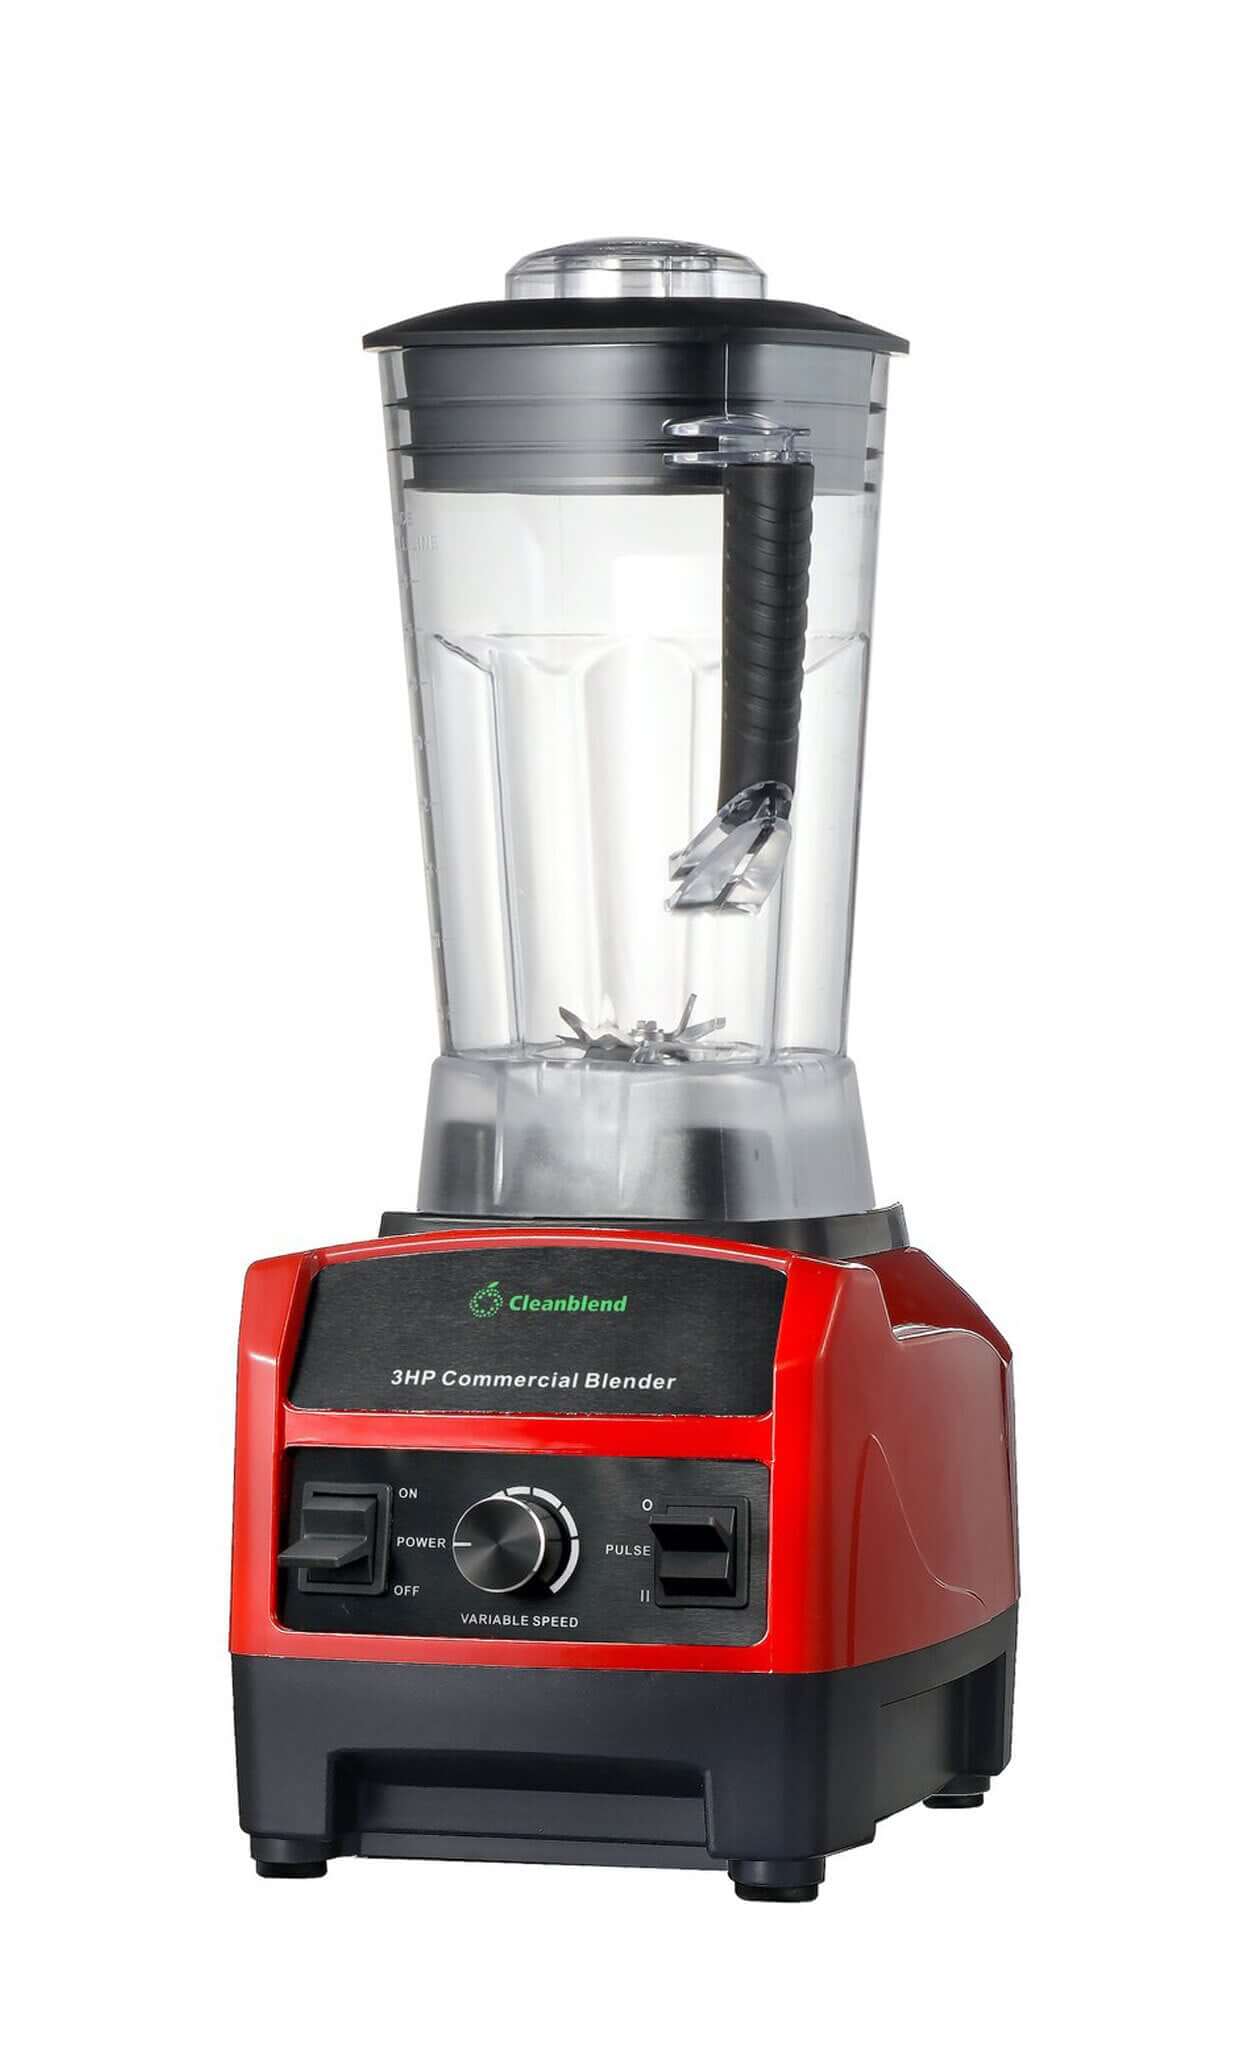  Cleanblend Commercial Blender - 64oz Countertop Blender 1800  Watts - High Performance, High Powered Professional Blender and Food  Processor For Smoothies: Electric Countertop Blenders: Home & Kitchen